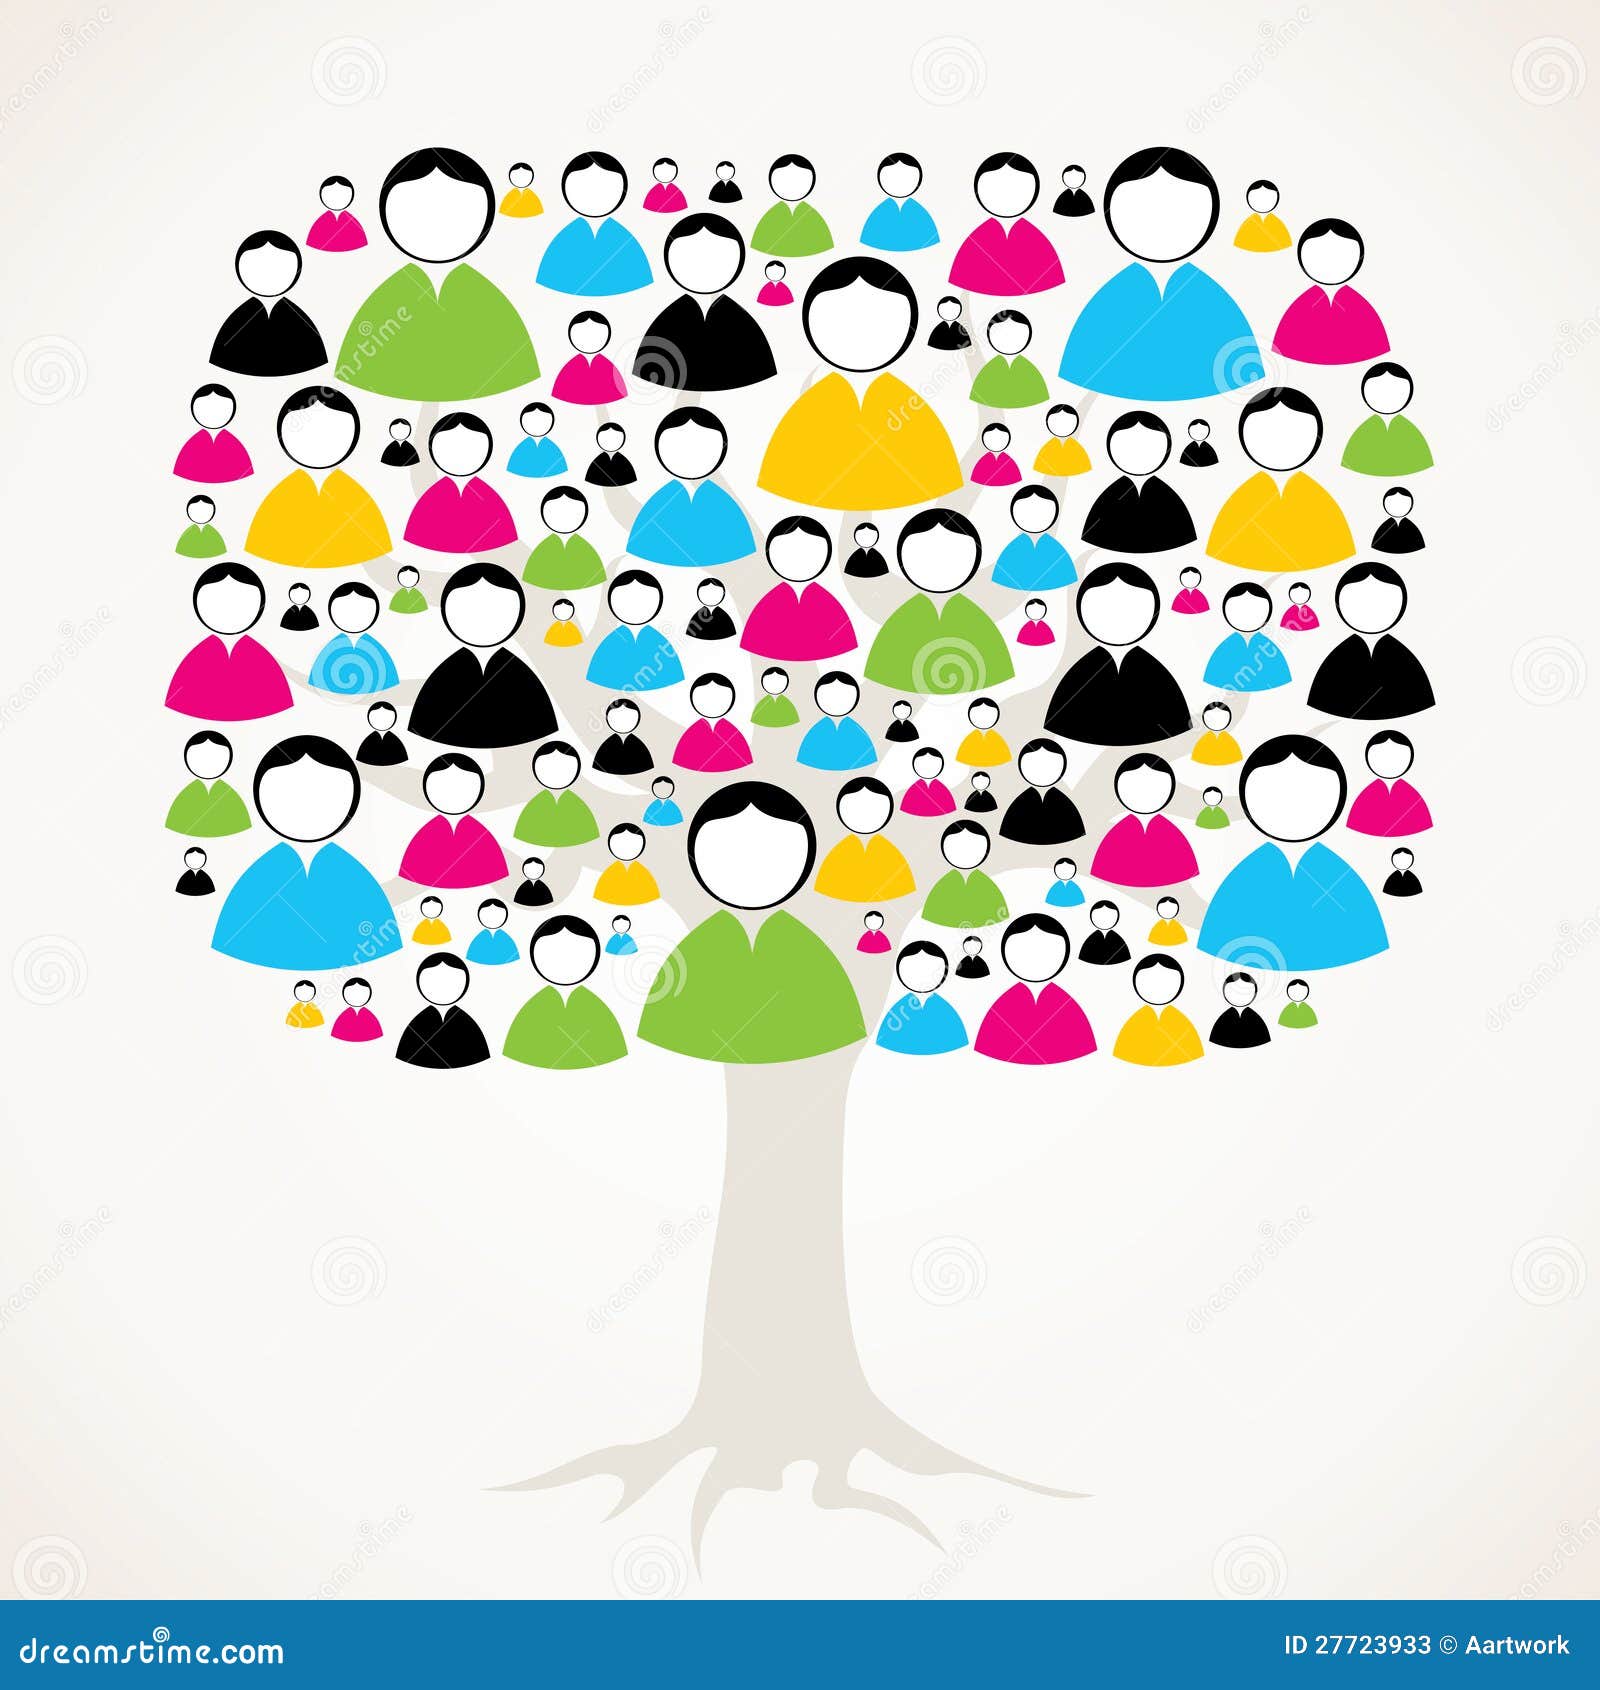 Male and Female Message Tree Stock Vector - Illustration of ...